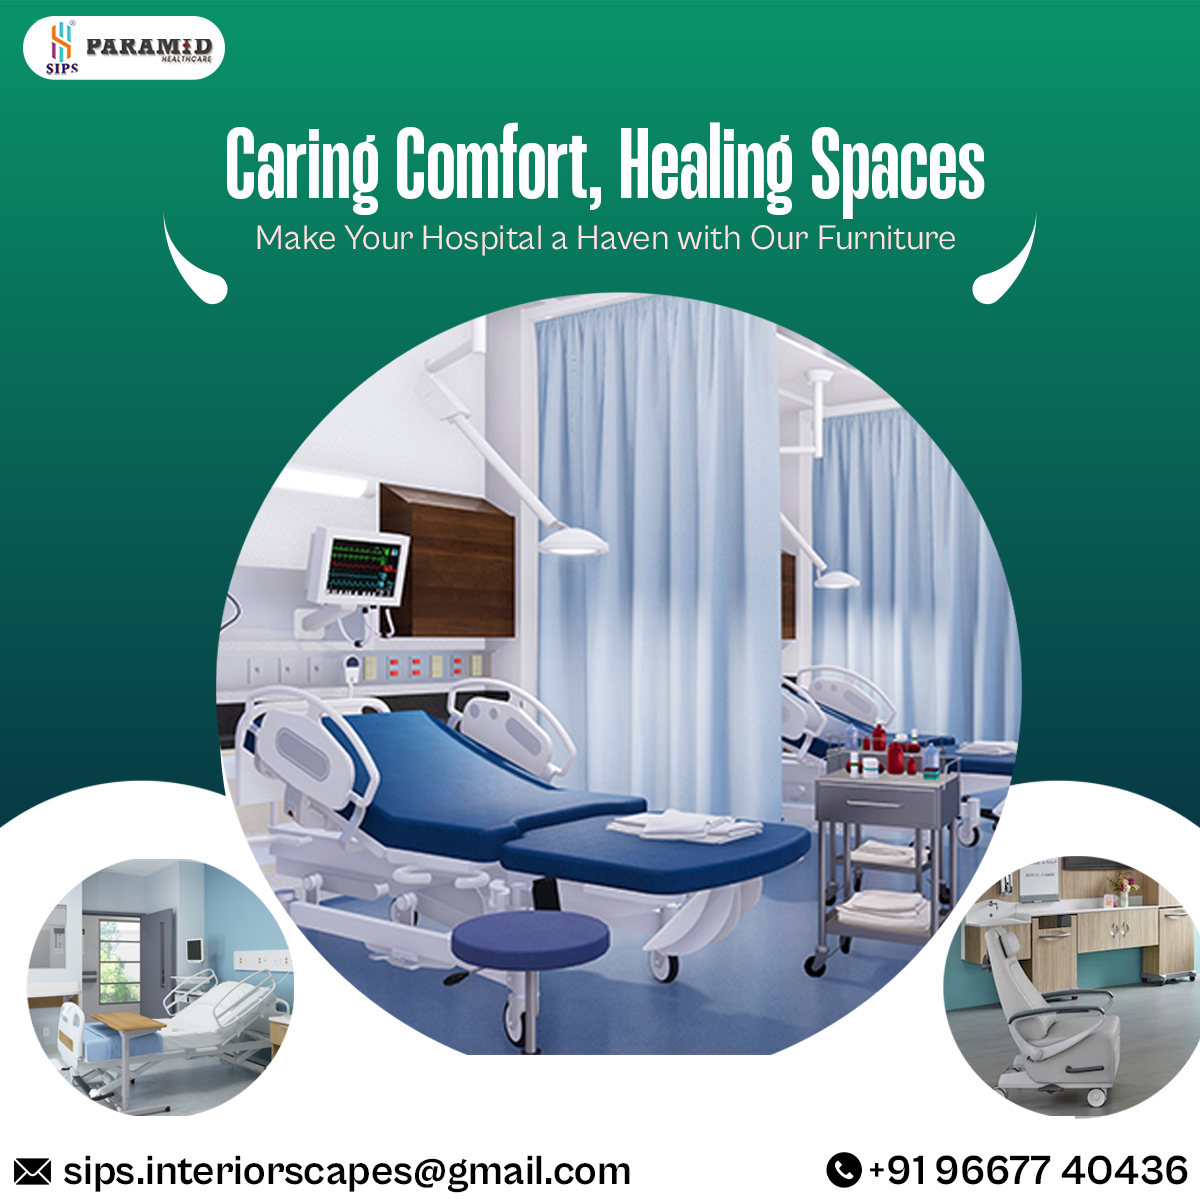 Caring Comfort, Healing Spaces
Make Your Hospital a Haven with Our Furniture
🌐 sips.interiorscapes@gmail.com
📞+9196677 40436
#hospitalfurniture #italianfurniture #importedfurniture #schoolfurniture #officefurniture #sips #hospitalfurnituredesign